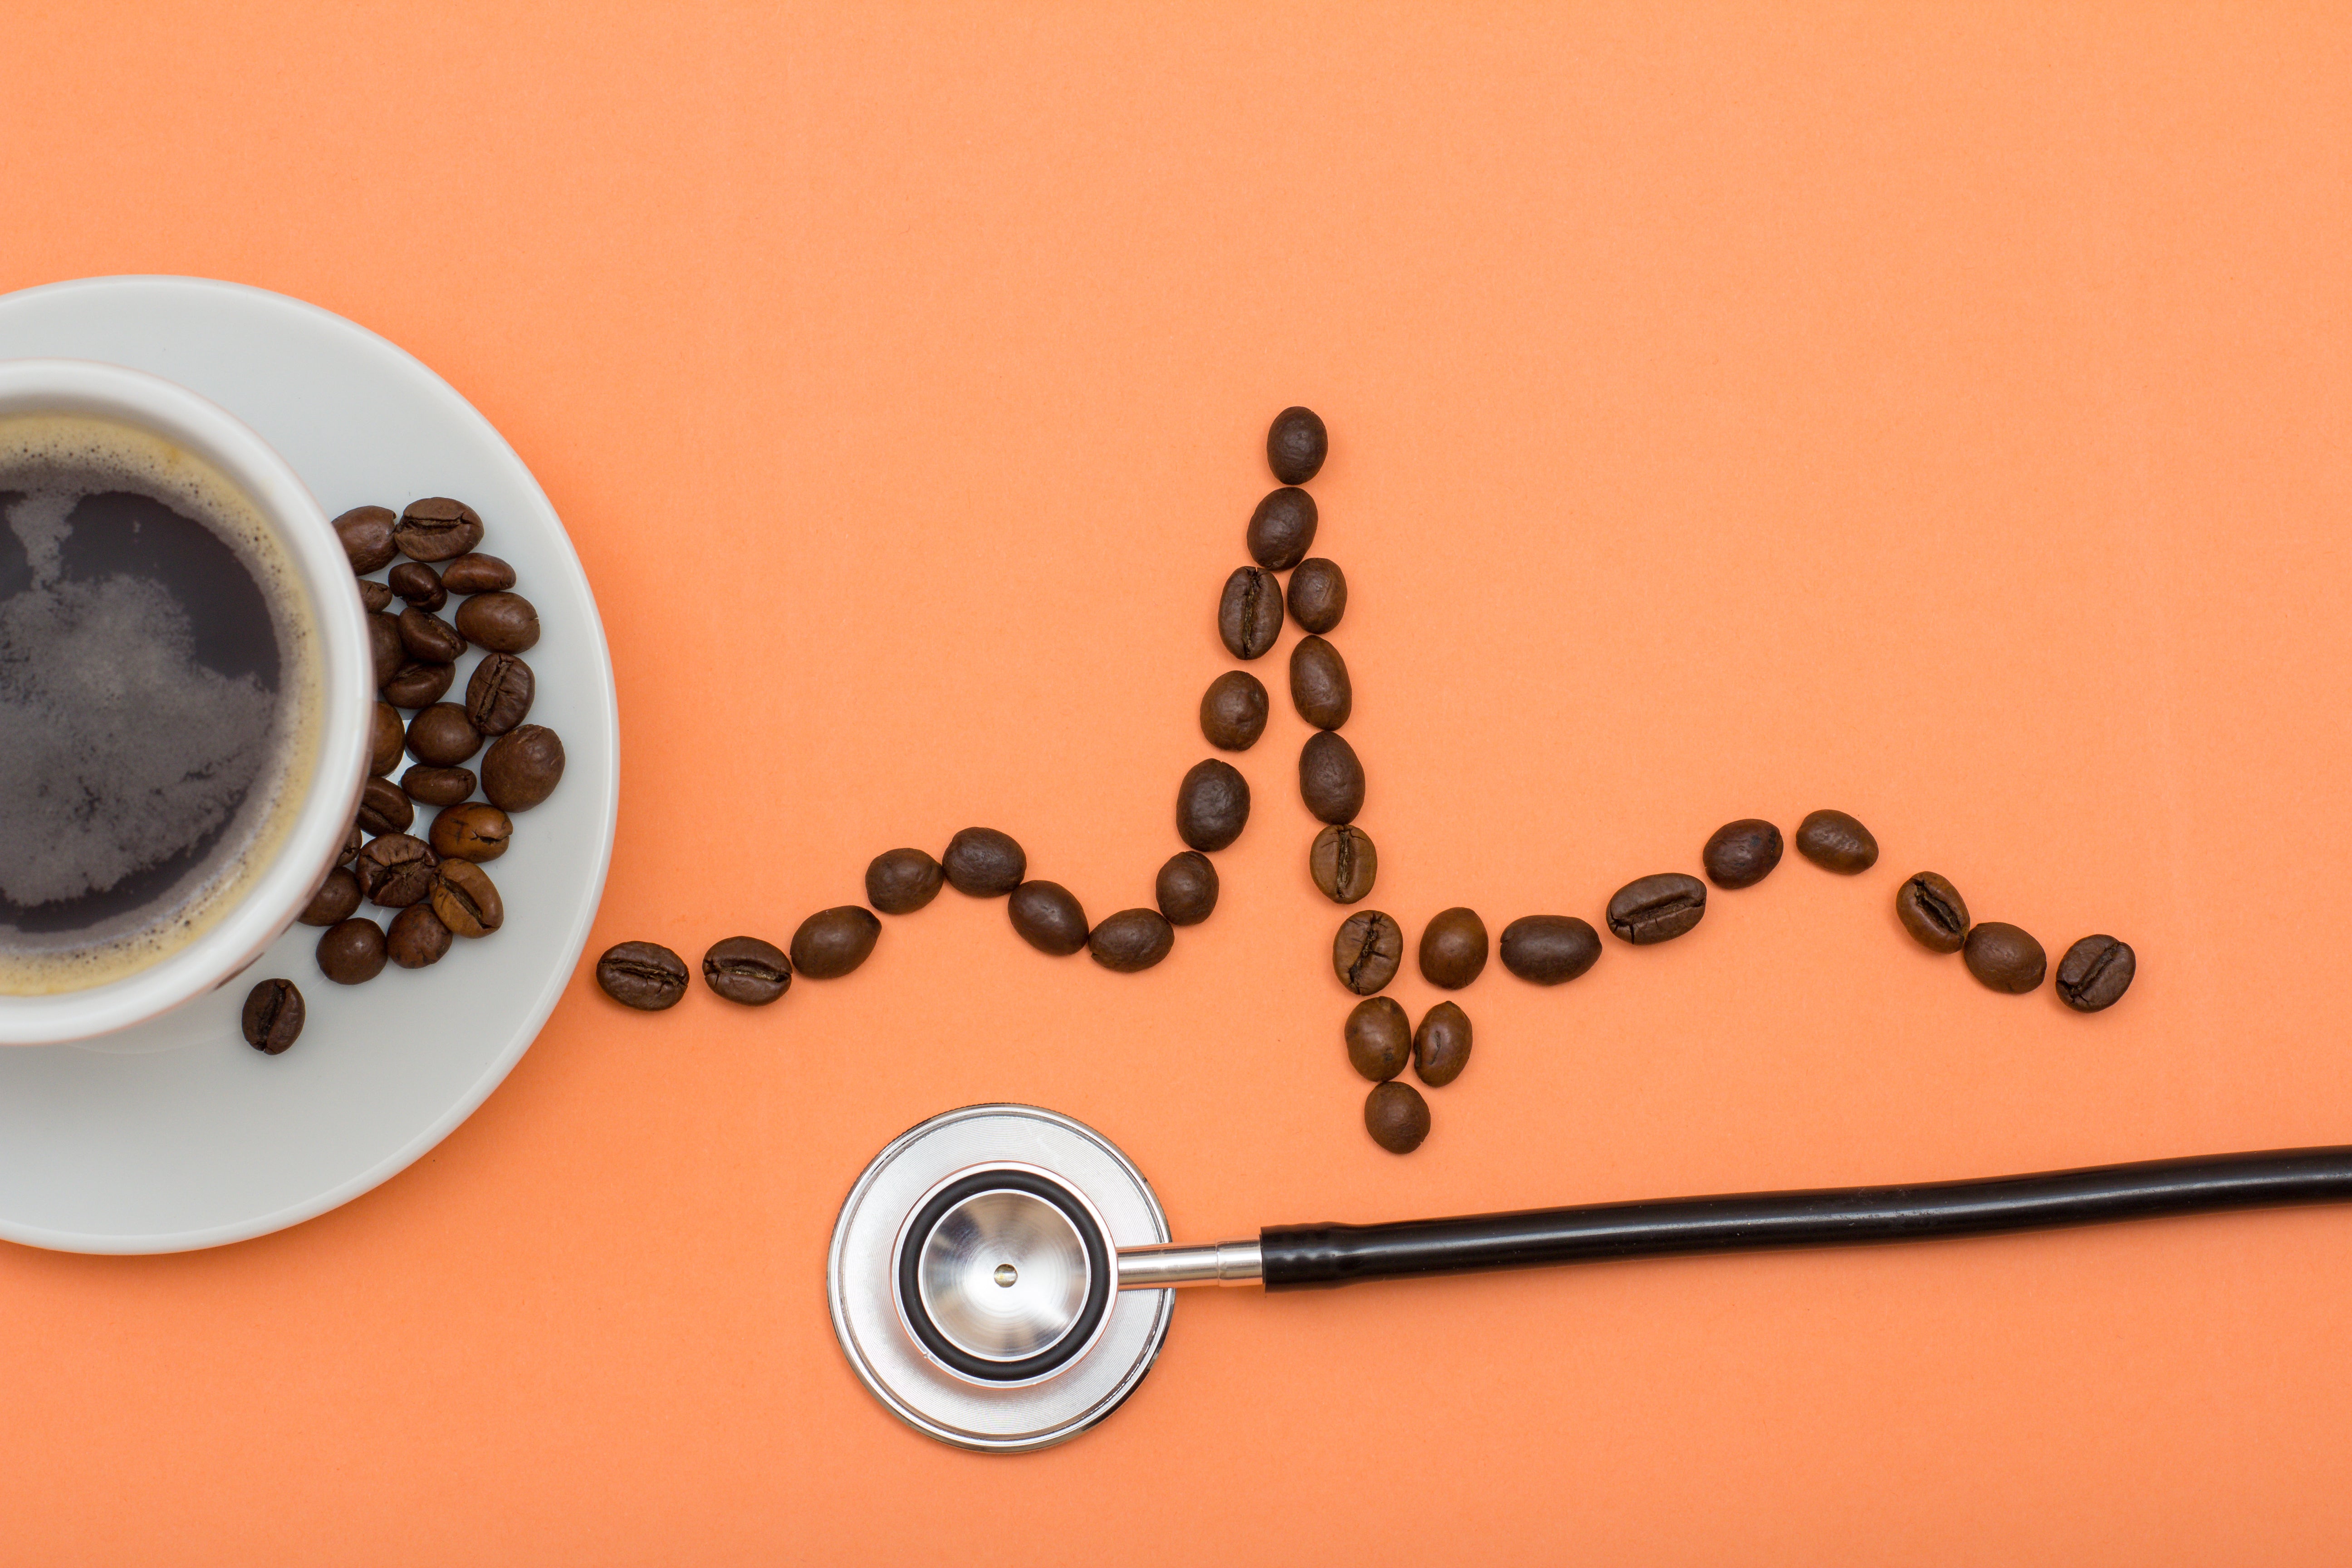 Starbucks pays more for healthcare than coffee beans.